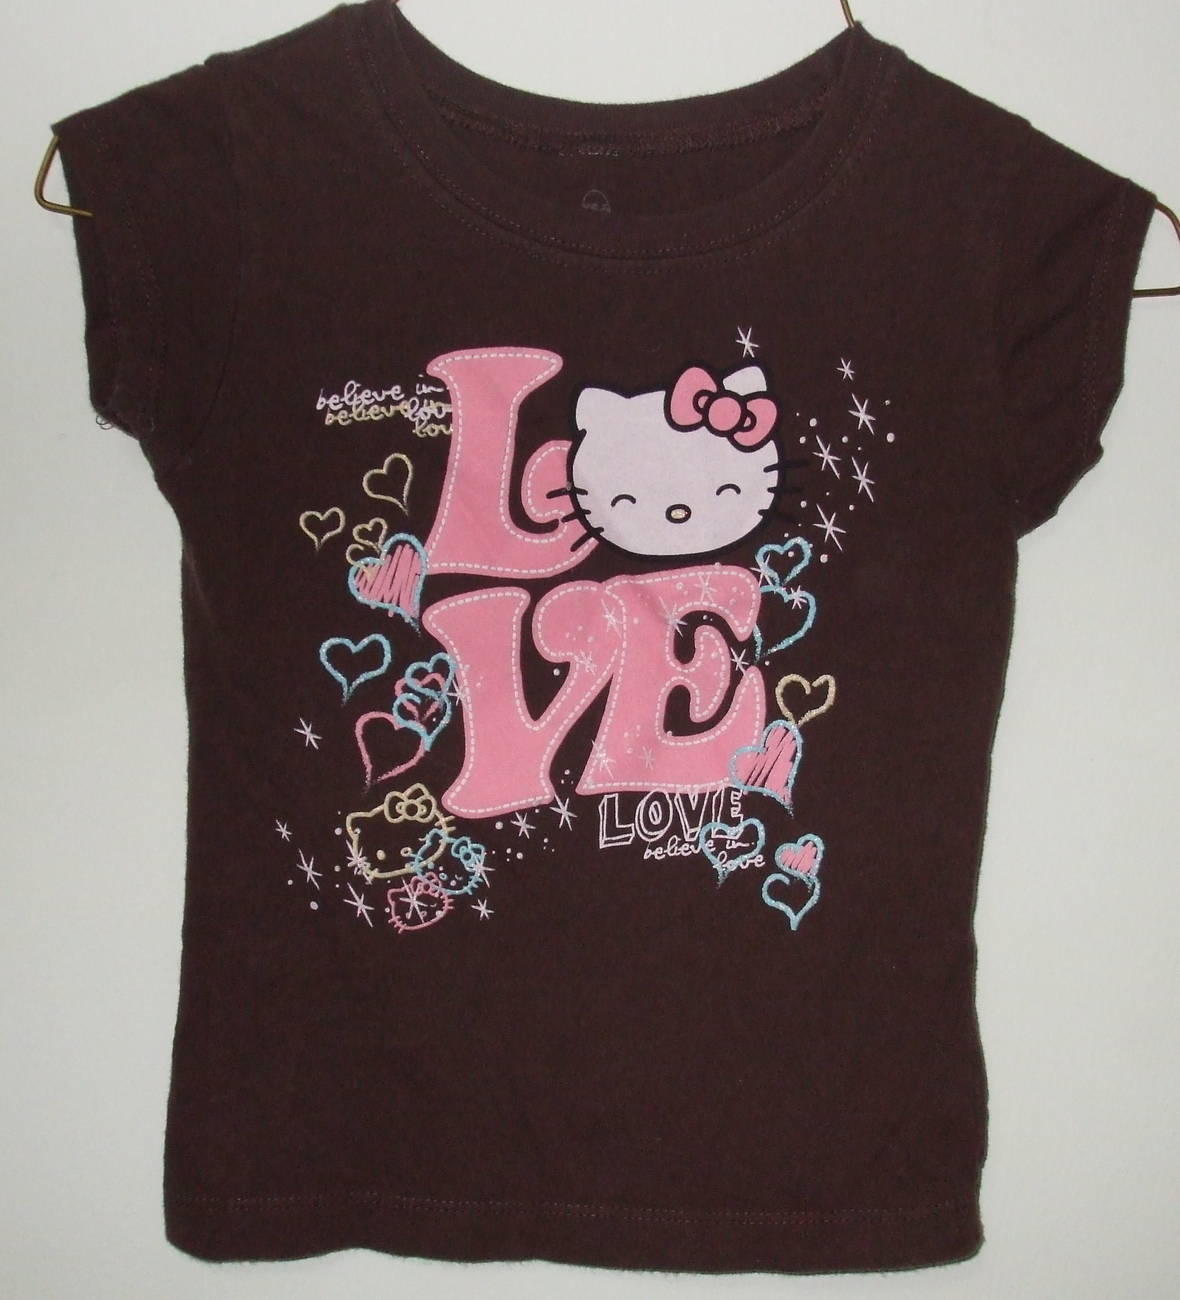 Girls Hello Kitty Brown Short Sleeve Top Size XS 4 - $4.95